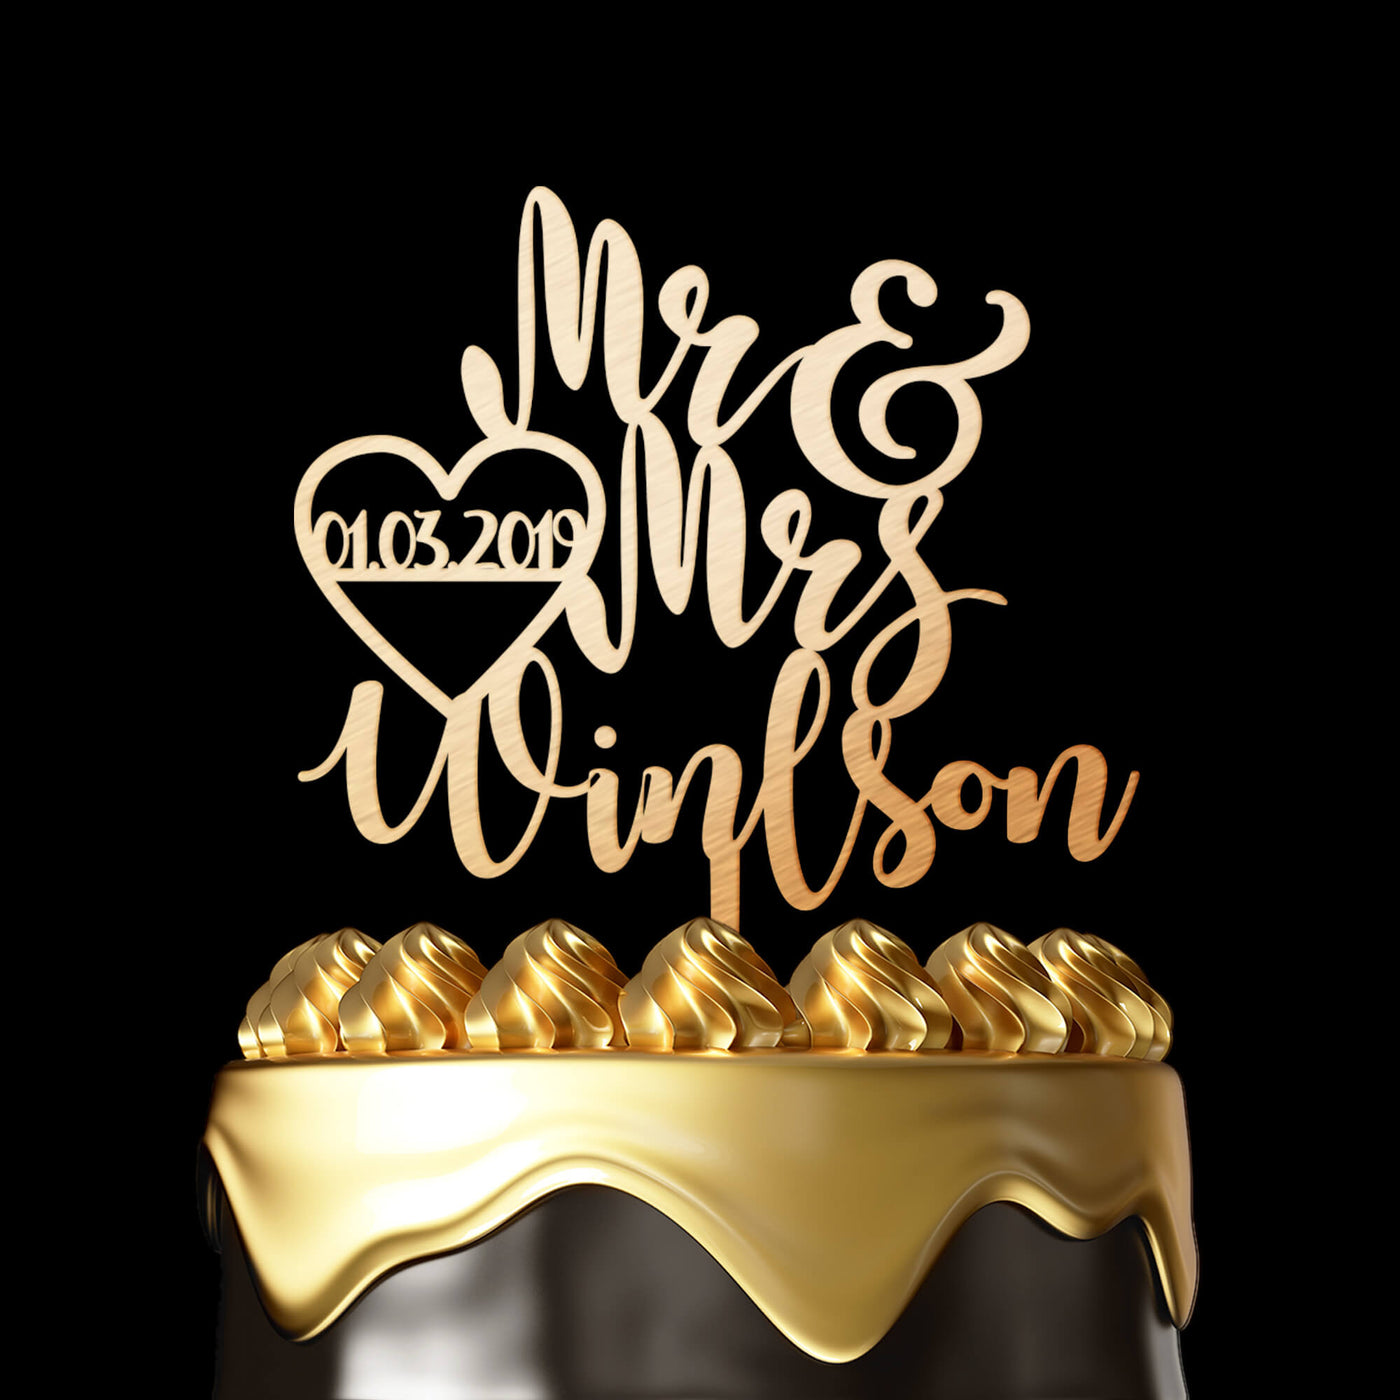 Personalized Cake Topper Henderson - Wedding Cake Topper by Luxtomi